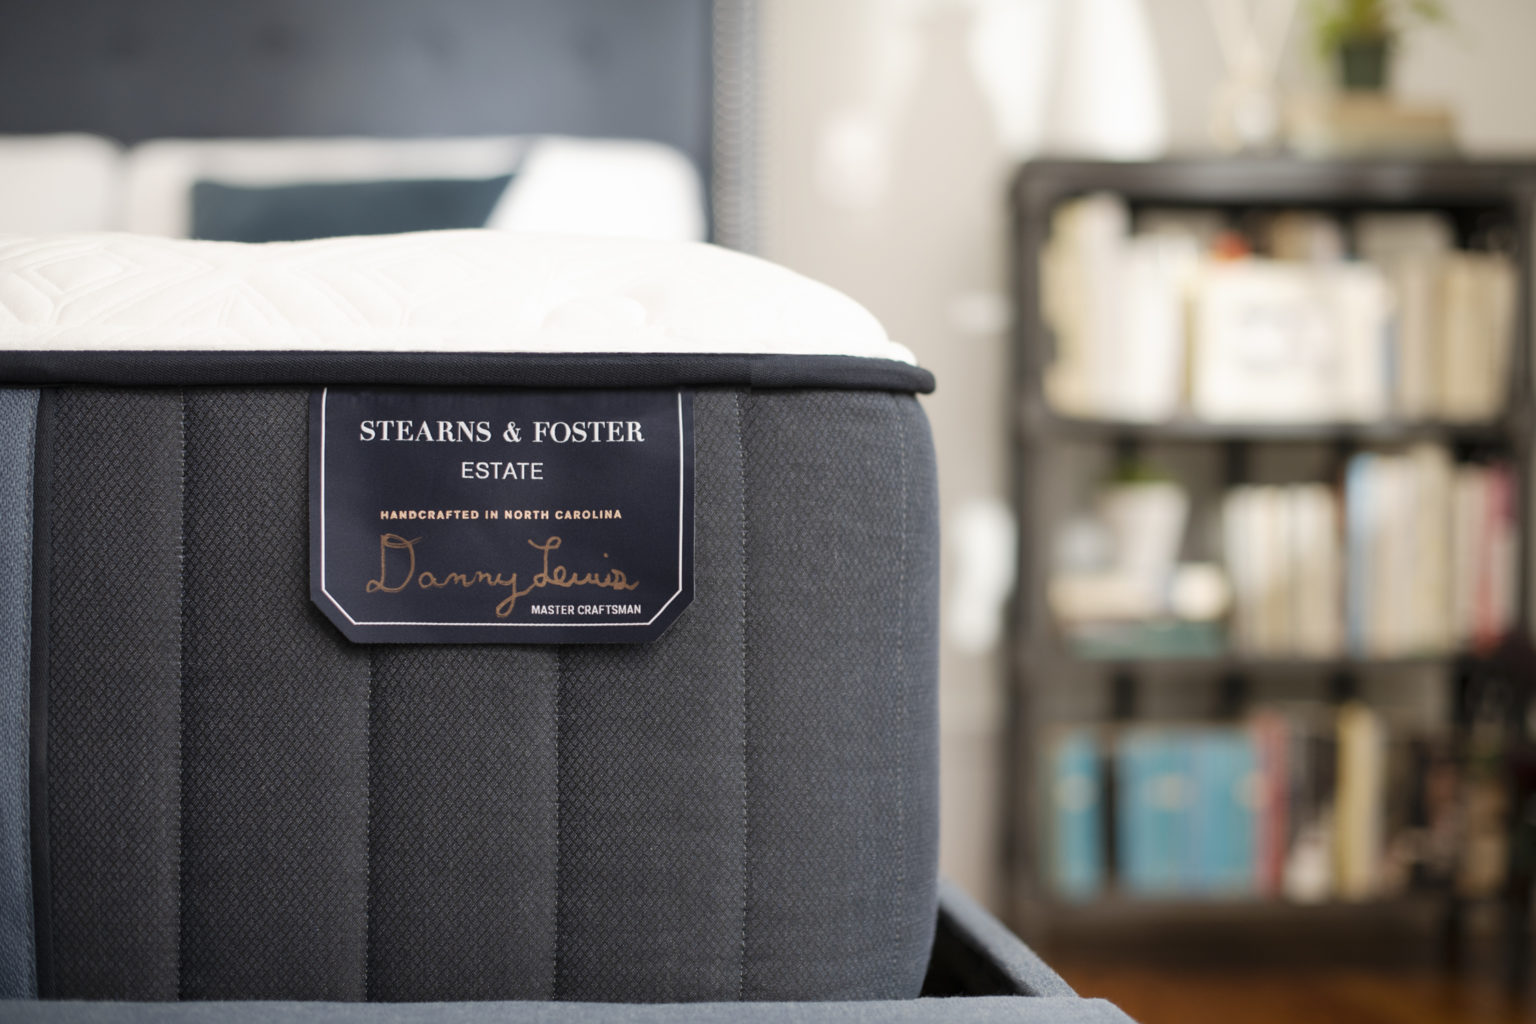 stearns and foster rockwell luxury firm eurotop mattress